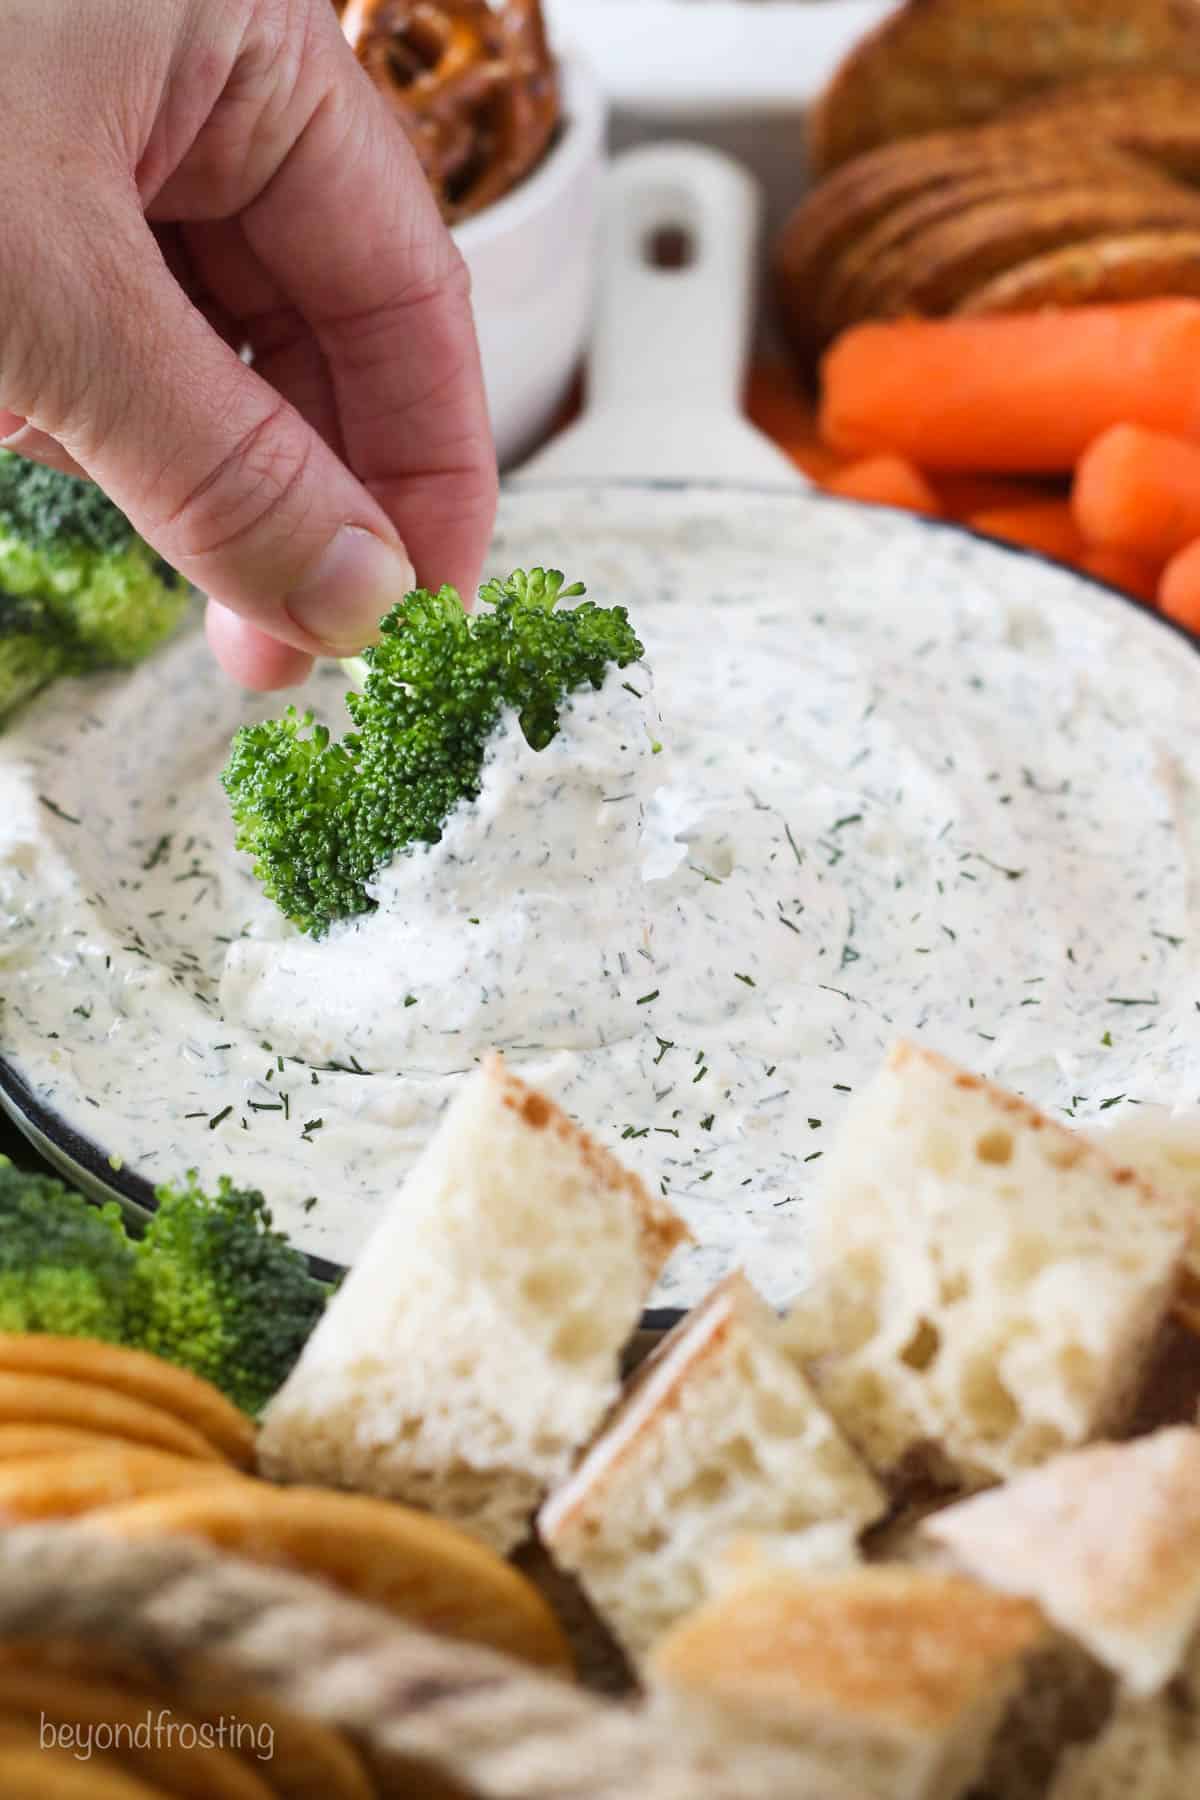 Broccoli being dipped in dill dip